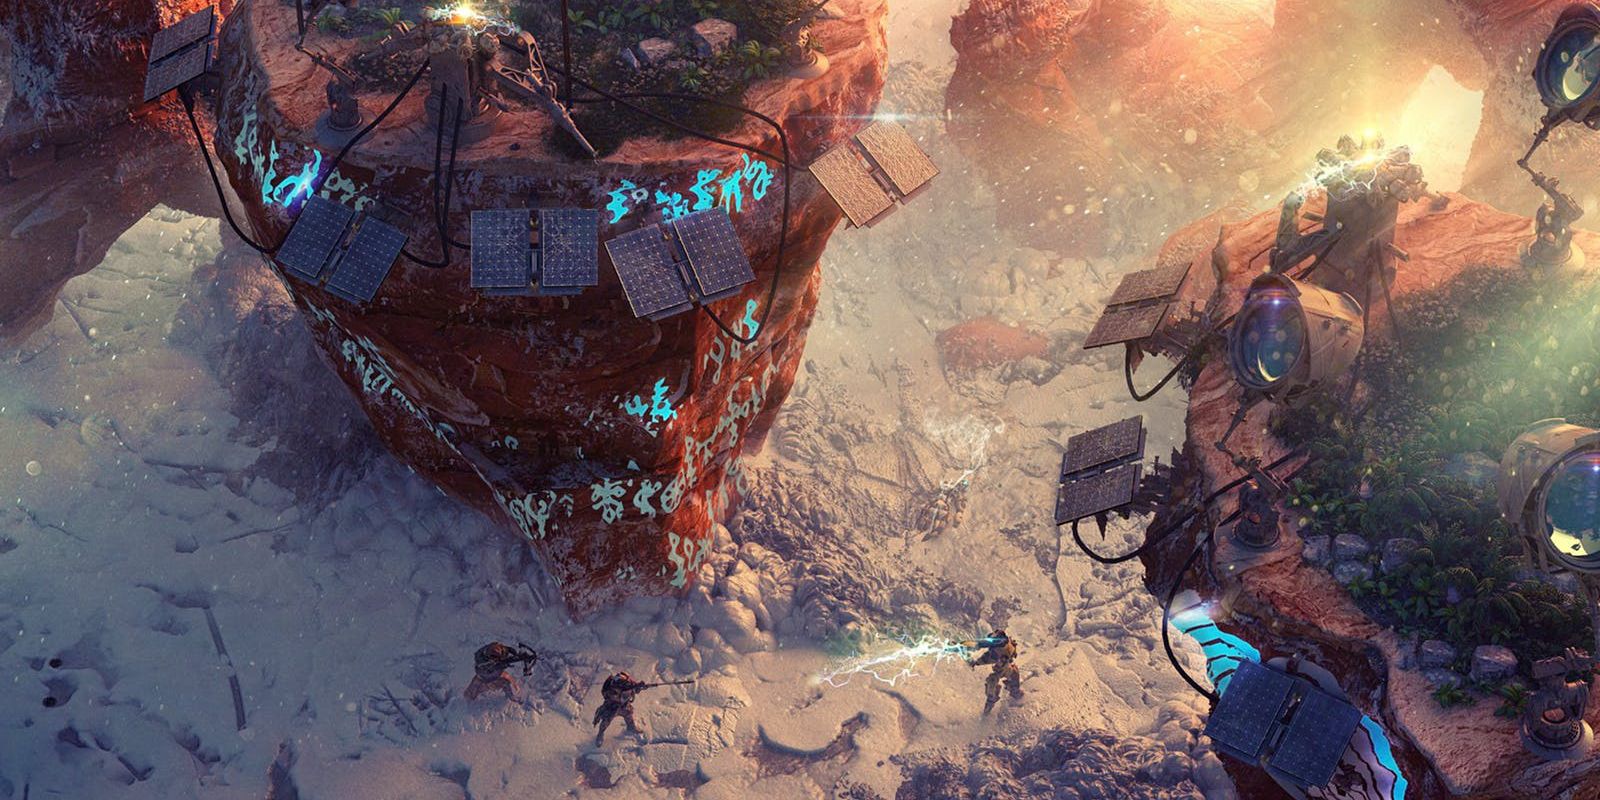 Wasteland 3 Preview A Warm Reception For A Frosty Apocalypse